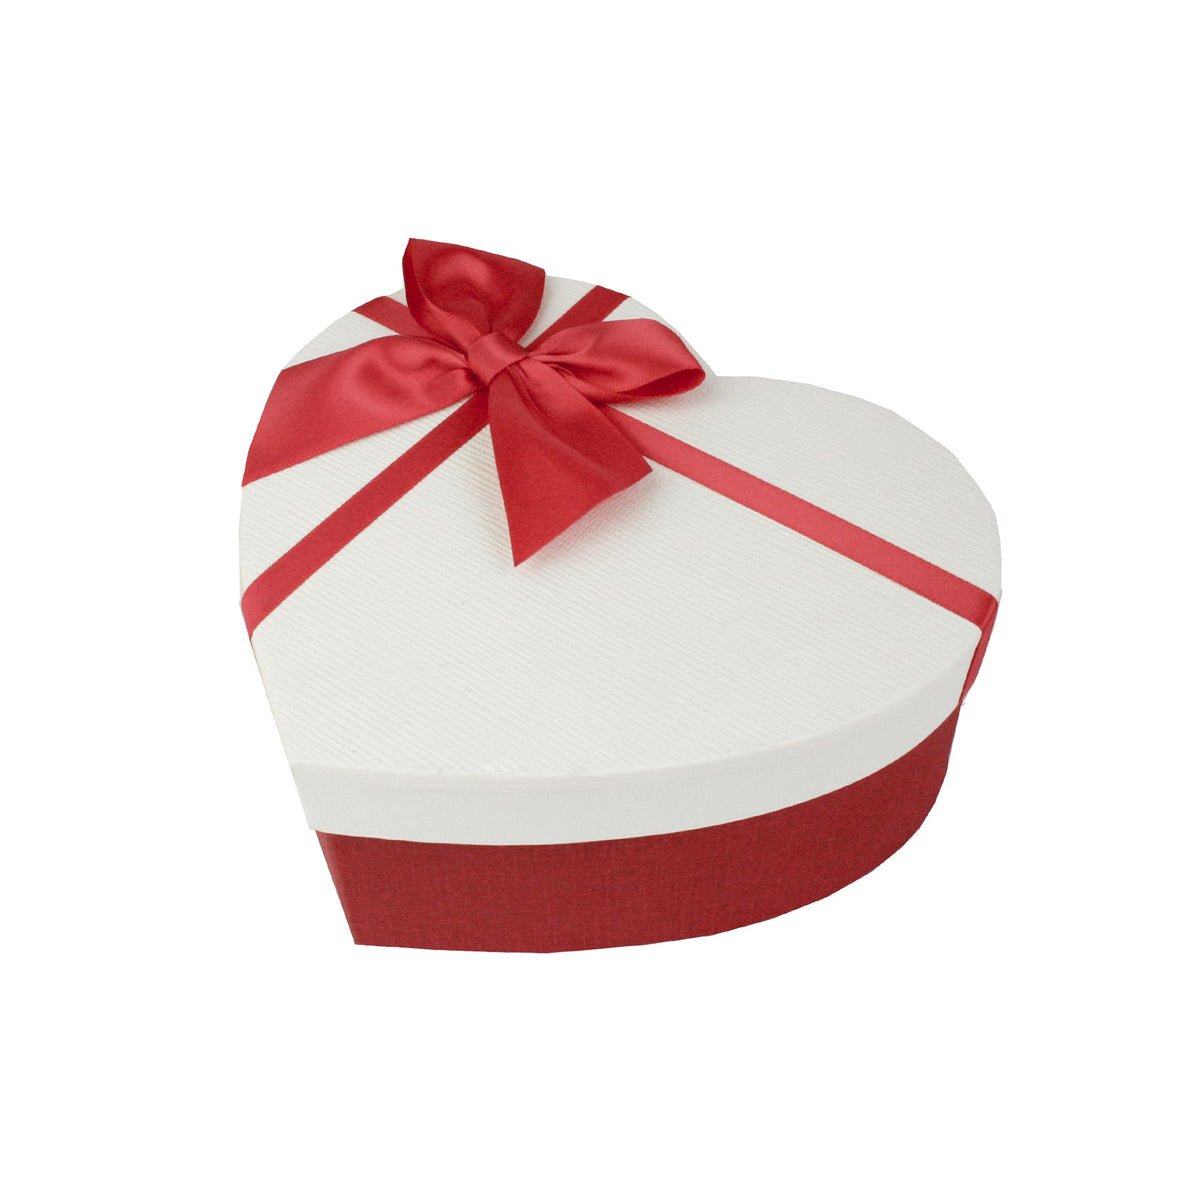 Single Red/White Gift Box with Red Satin Ribbon (Sizes Available)